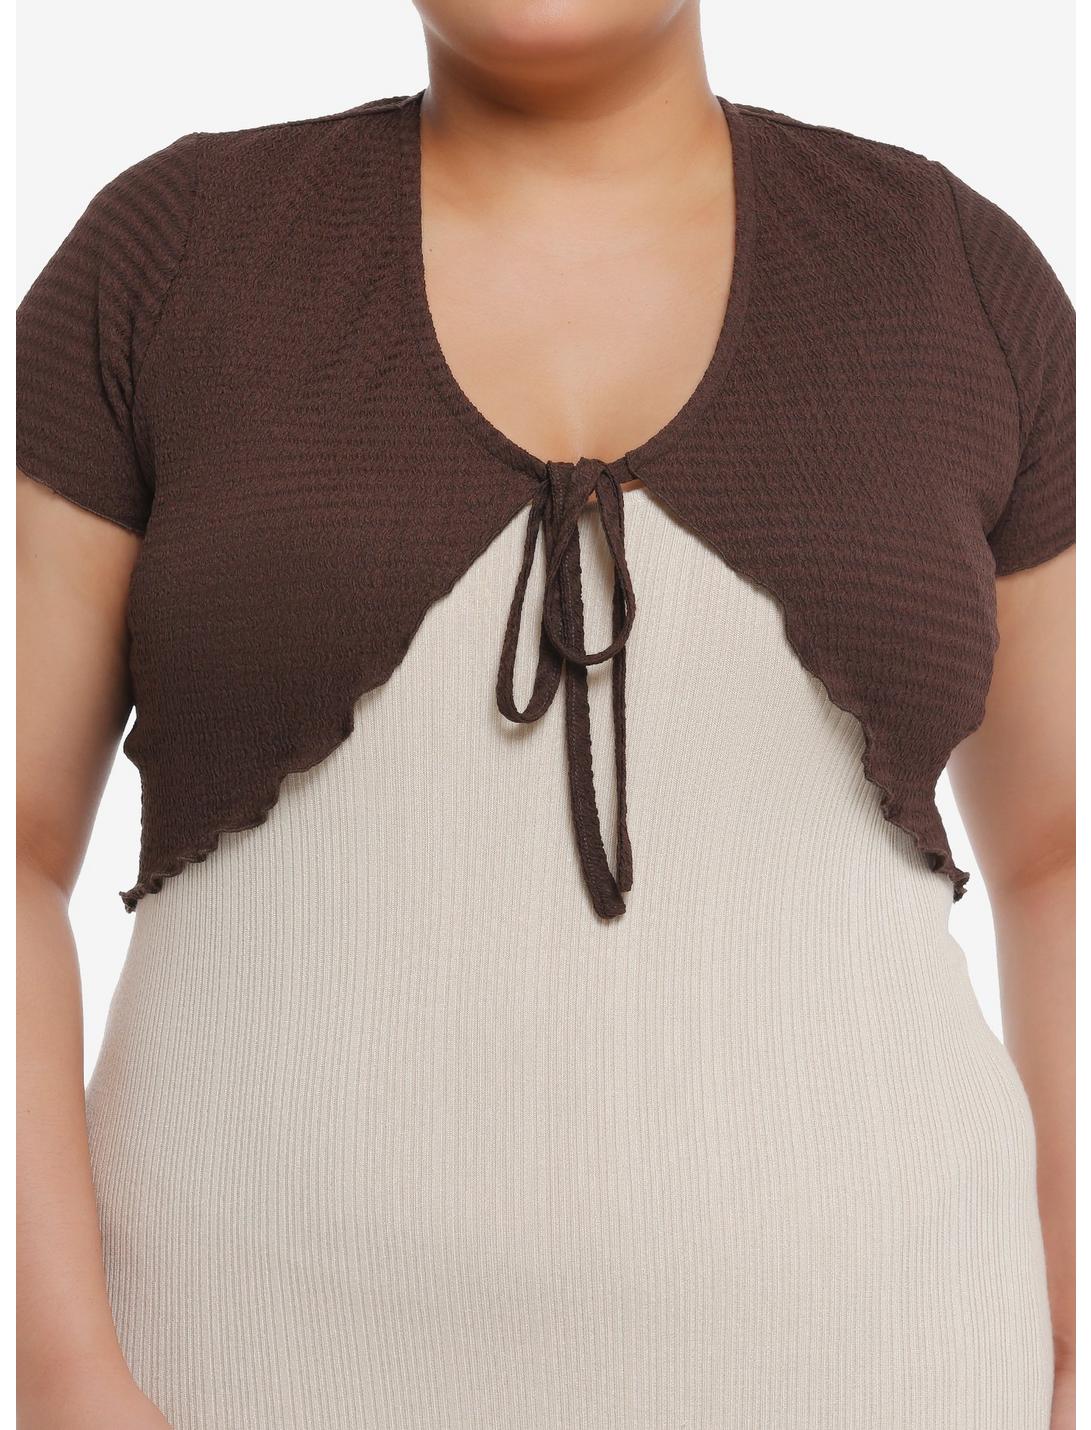 Thorn & Fable Brown Textured Girls Crop Shrug Plus Size, BROWN, hi-res